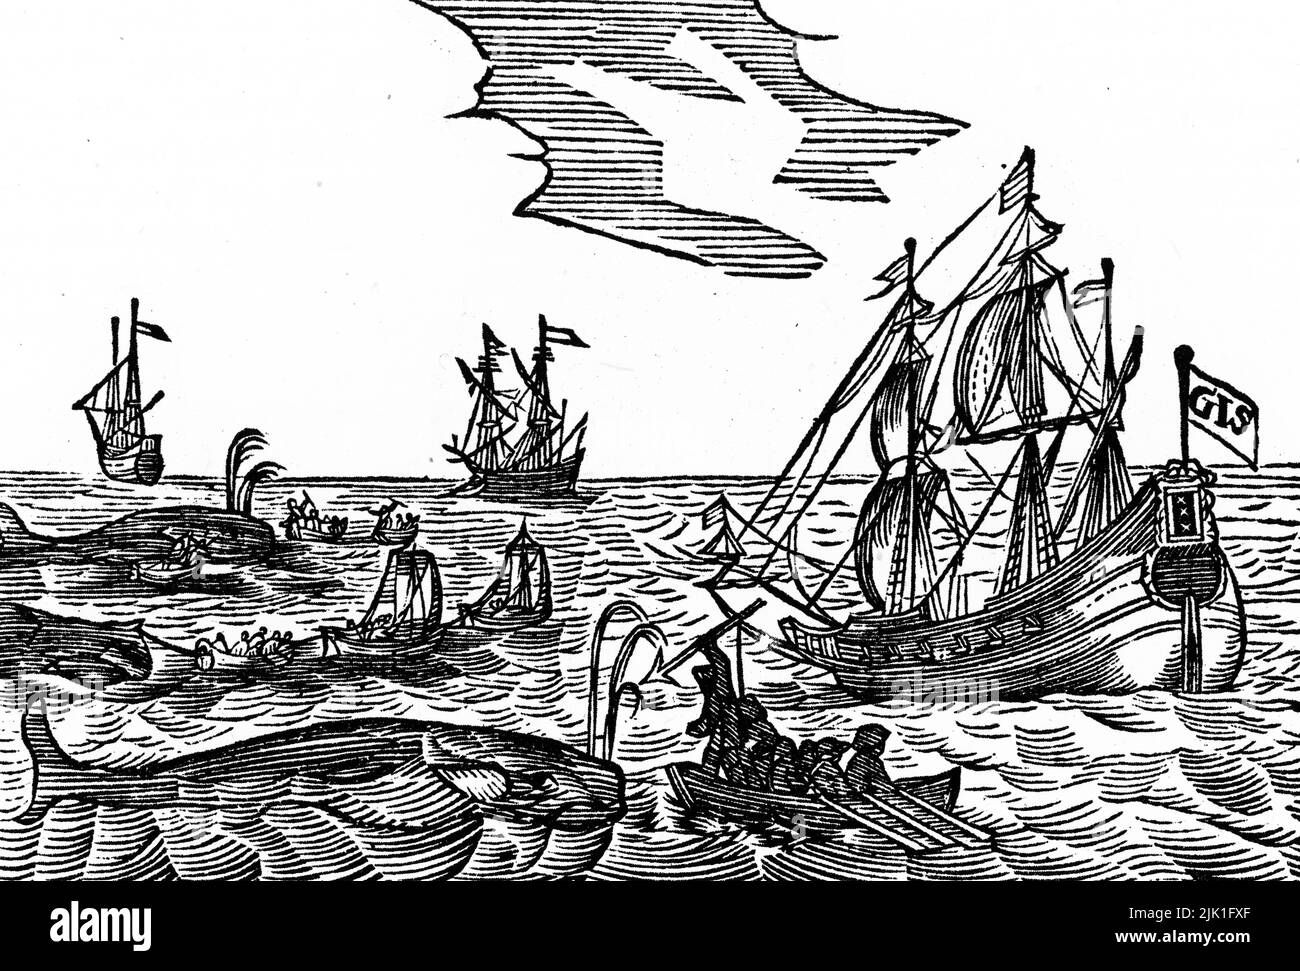 Whaling, 1634. Woodcut from Jacob Segersz van der Brugge's journal. Jacob Segersz van der Brugge published his journal shortly after returning home from whaling in 1634. Stock Photo